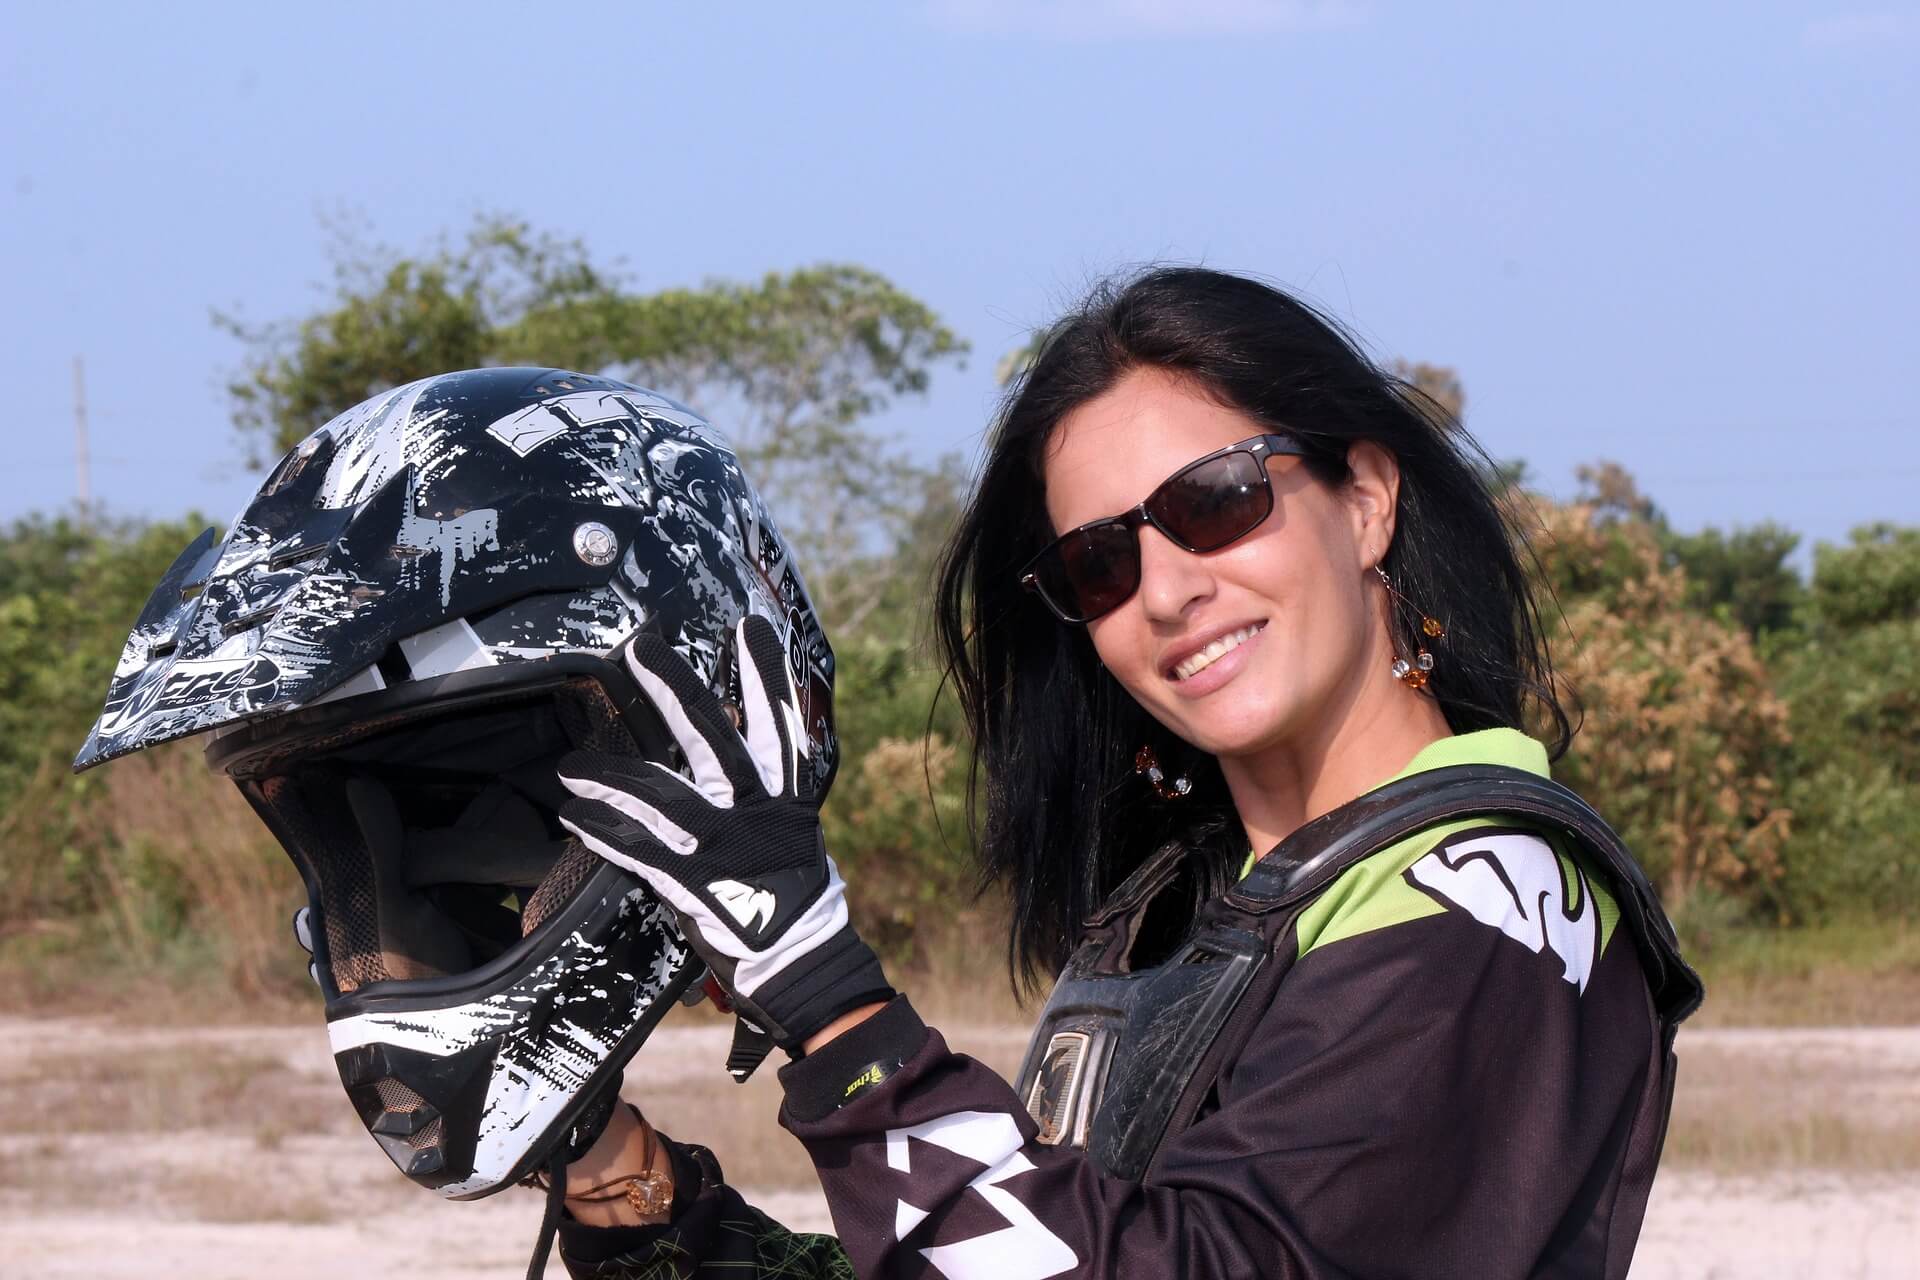 more female motorcycle riders